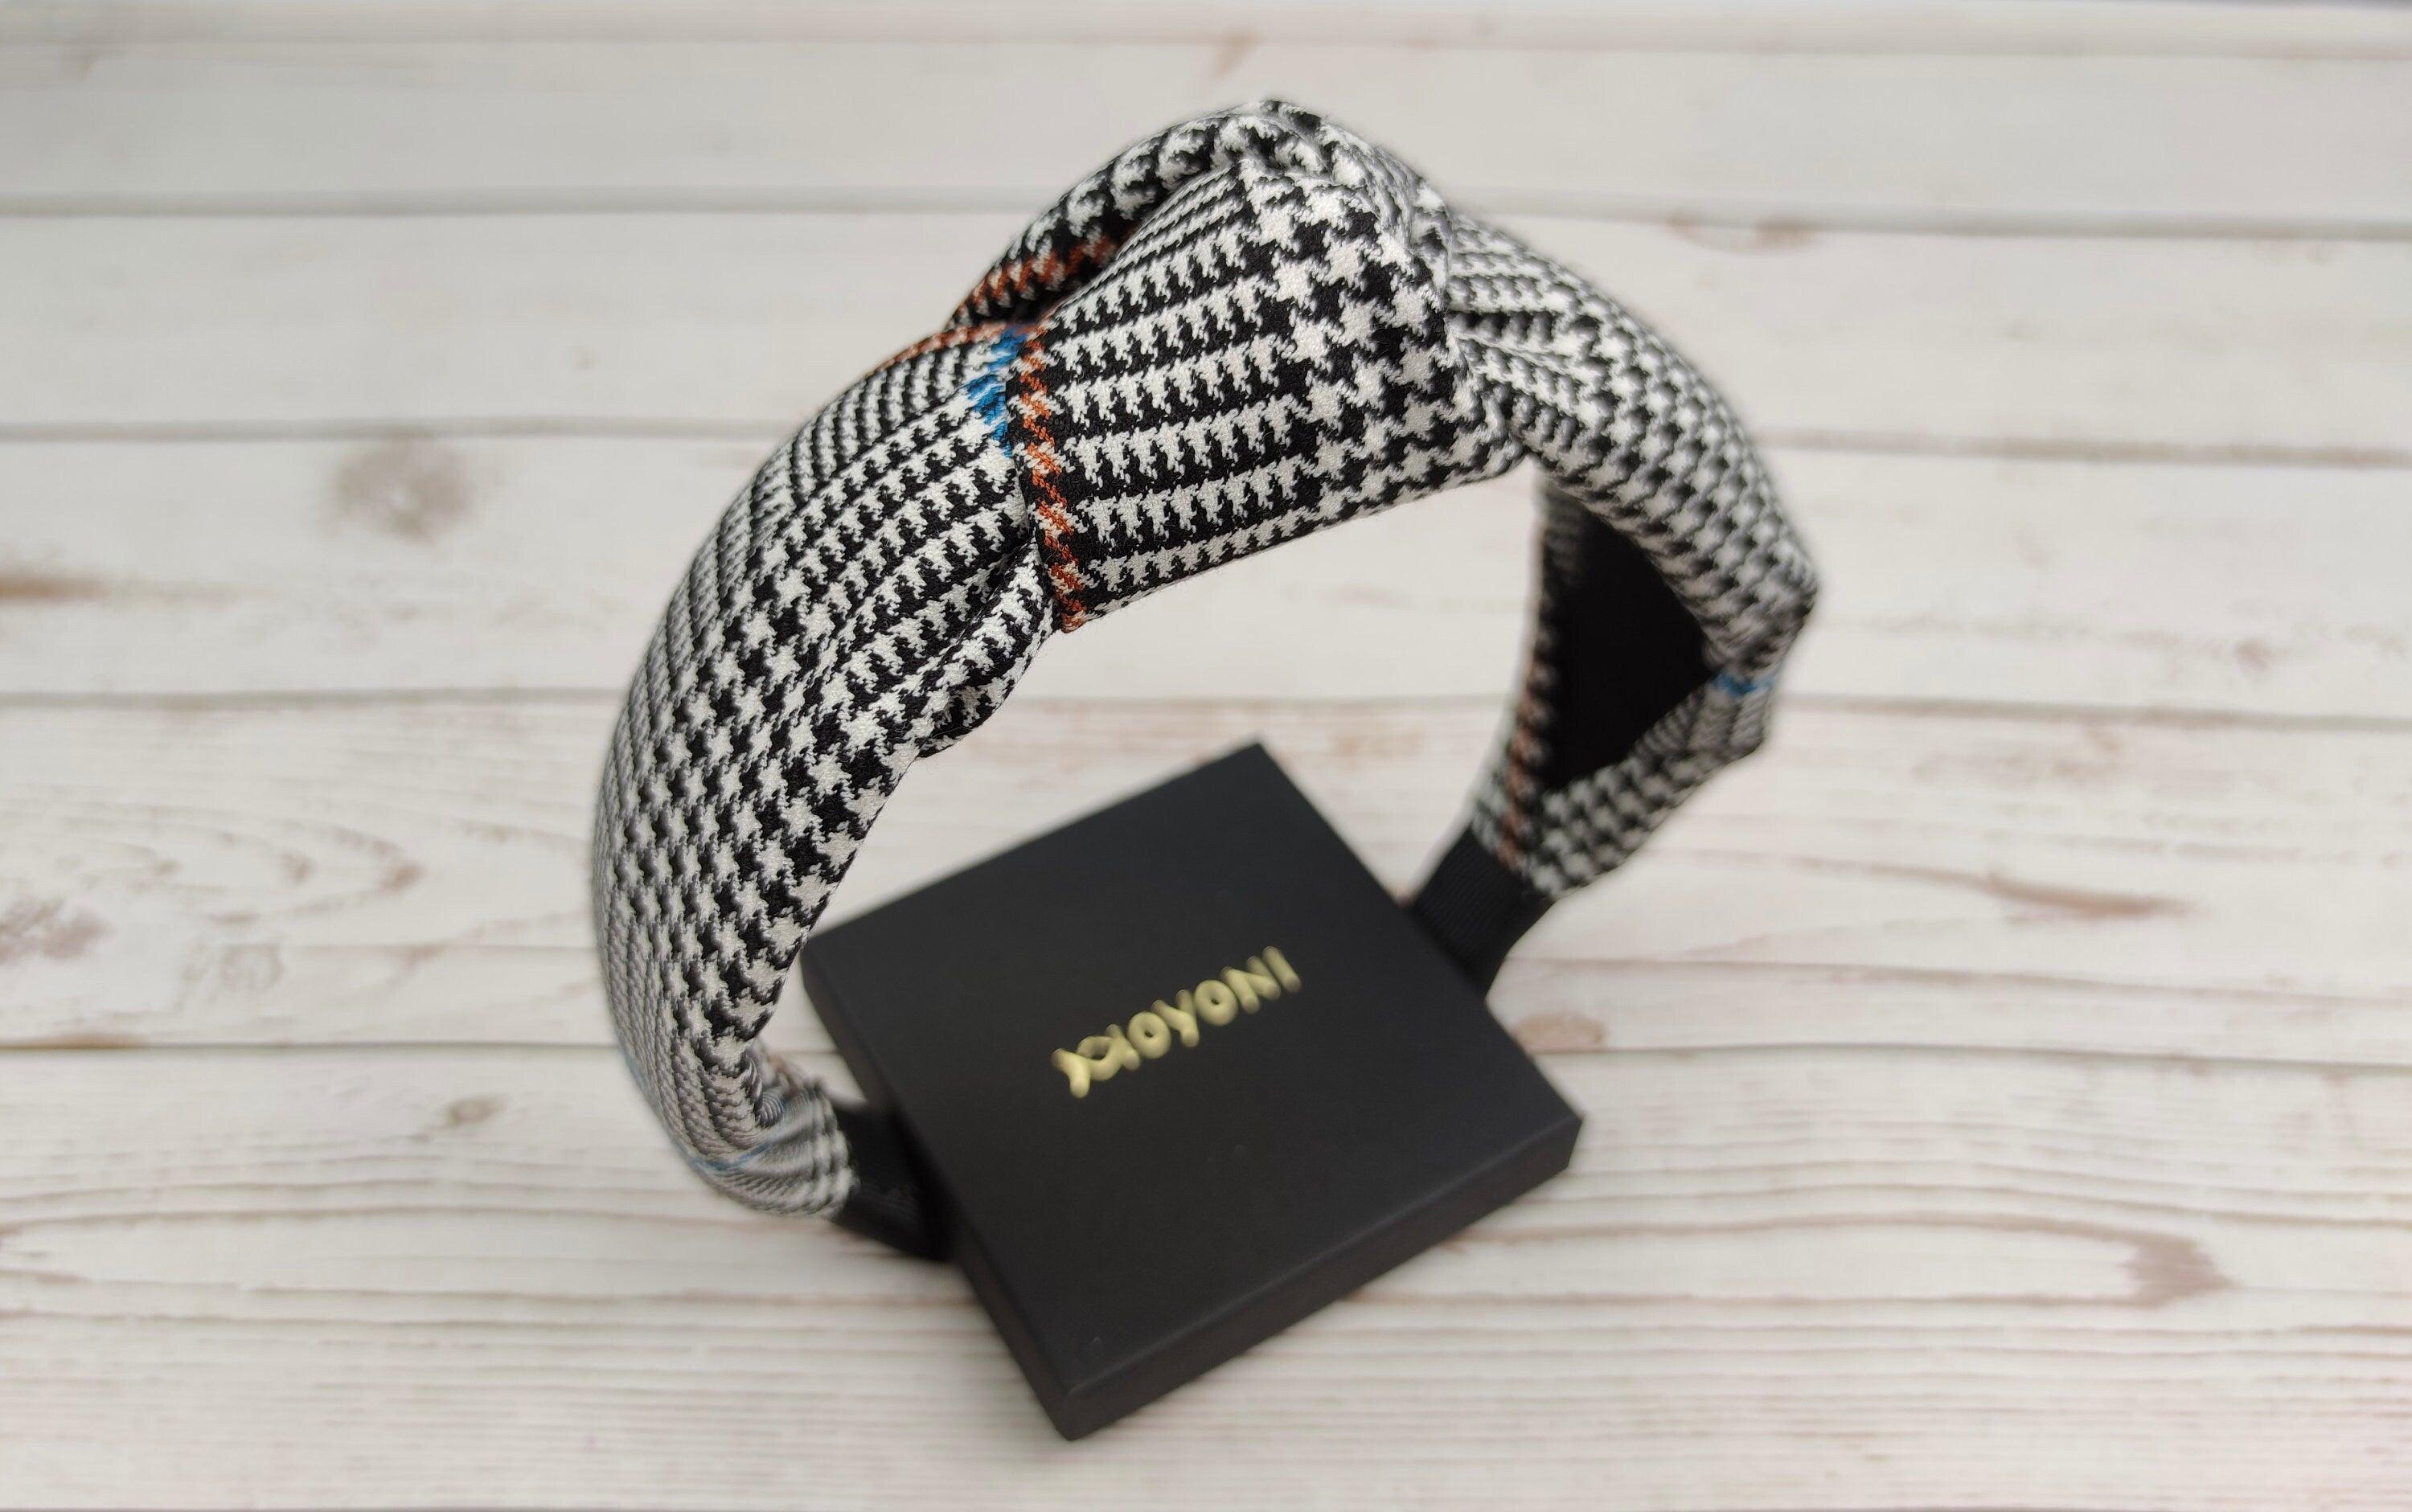 Luxurious Classic Knotted Crepe Headband in White and Black, Perfect for College Fashion and Everyday Wear - Featuring Blue and Orange Stripes available at Moyoni Design